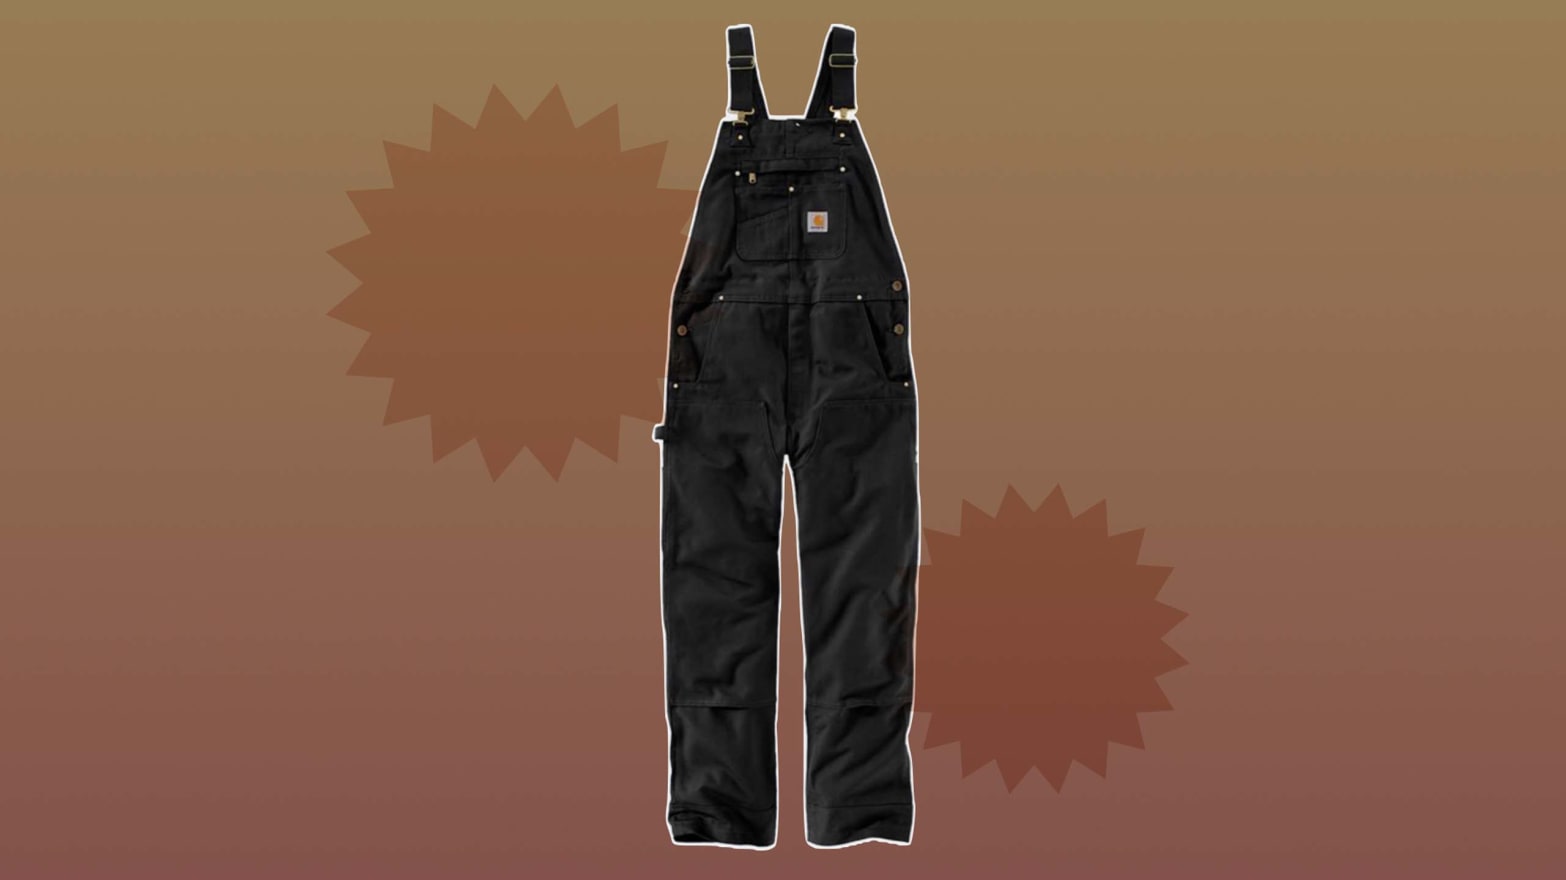 Carhartt Men’s Relaxed Fit Overalls Review | Scouted, The Daily Beast